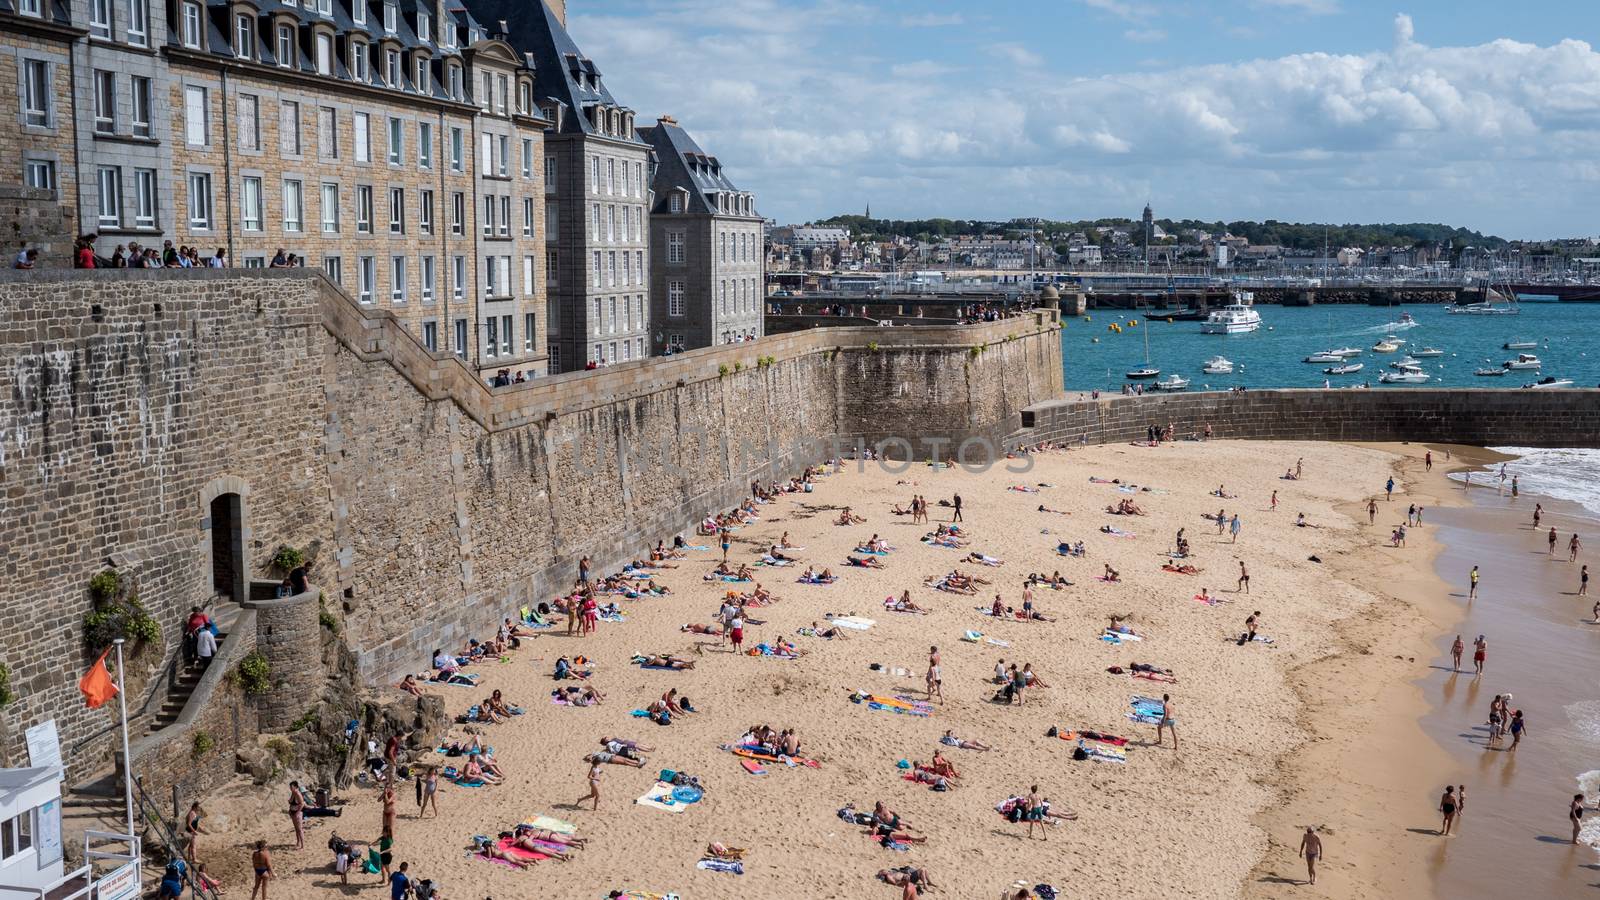 Beautiful beach of saint Malo, France 17-9-19. Green sea, blue sky with people swimming and boats in background